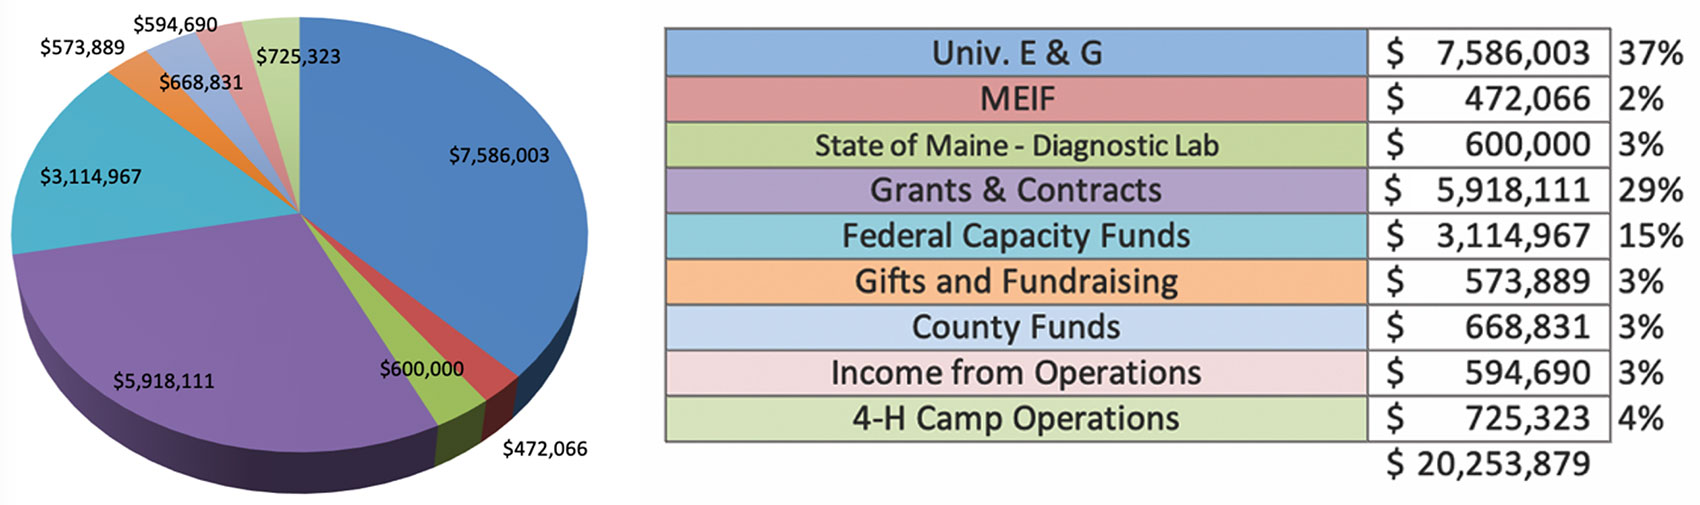 Piechart showing funding sources: Univ. E & G = $7,586,003 (37%); MEIF = $472,066 (2%); State of Maine - Diagnostic Lab = $600,000 (3%); Grants & Contracts = $5,918,111 (29%); Federal Capacity Funds = $3,114,967 (15%); Gifts and Fundraising = $573,889 (3%); County Funds = $668,831 (3%); Income from Operations = $594,690 (3%); 4-H Camp Operations = $725,323 (4%); total = $20,253,879